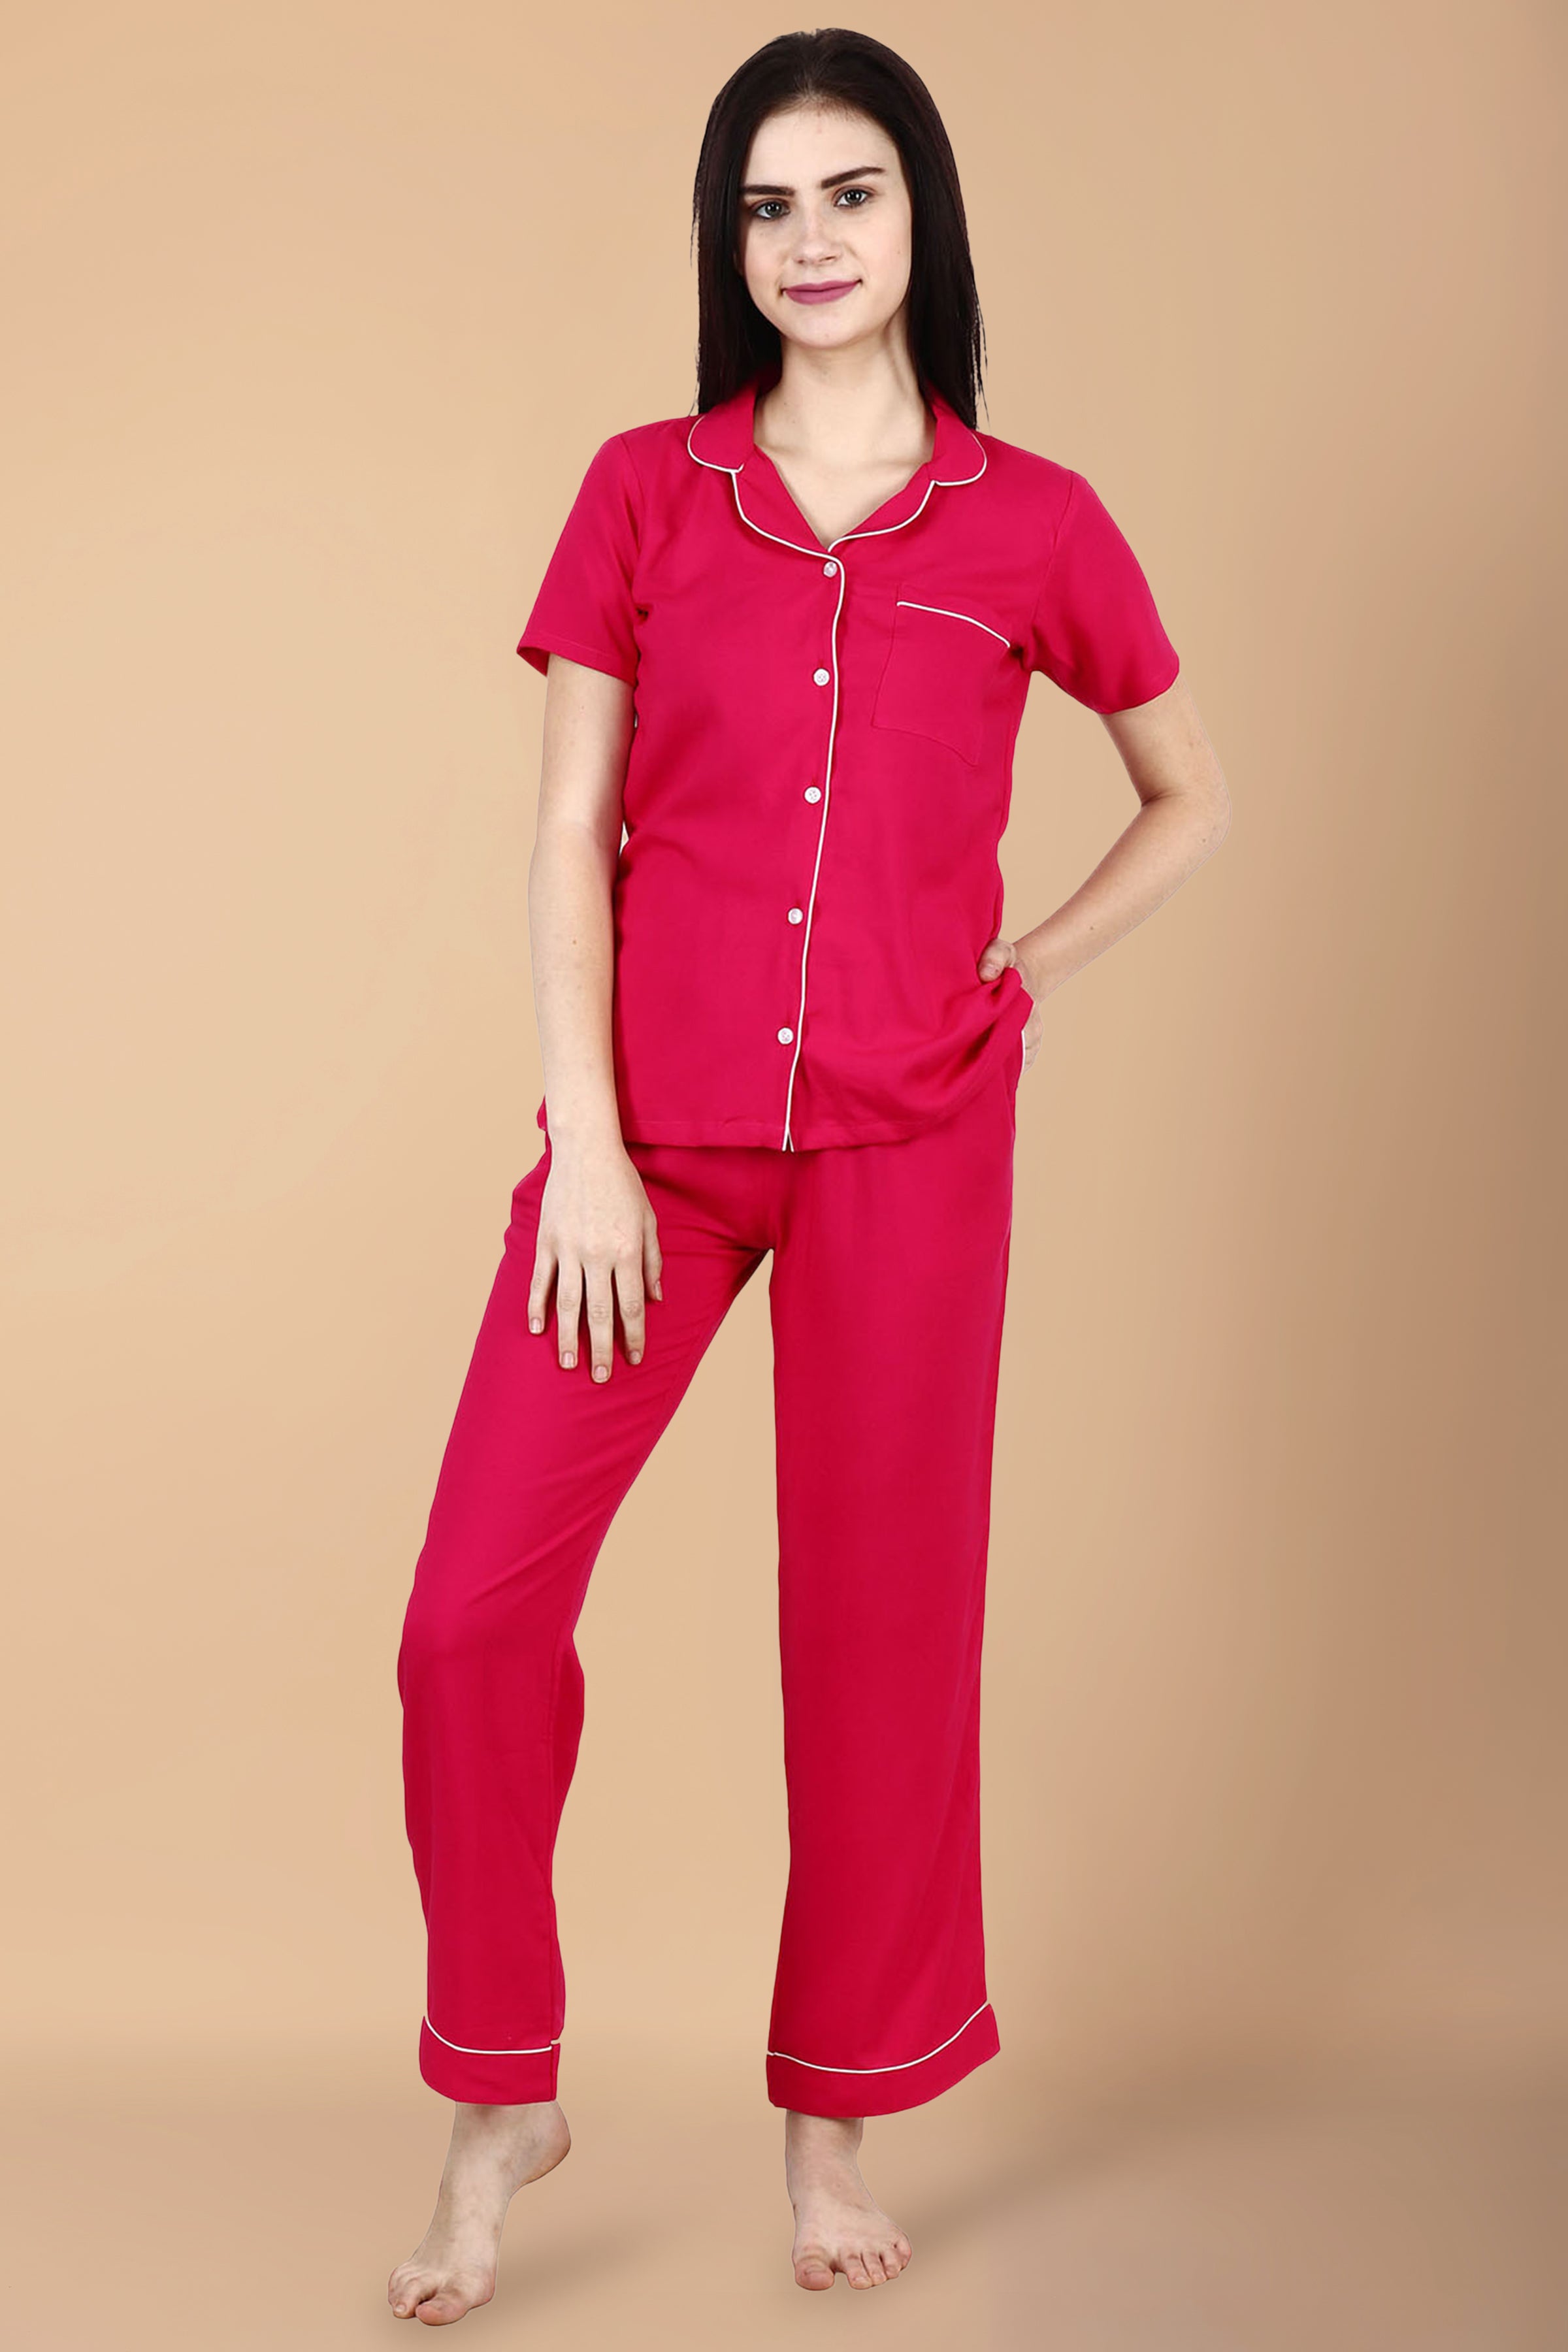 5 Easy Tips to Select the Perfect Women's Nightsuit